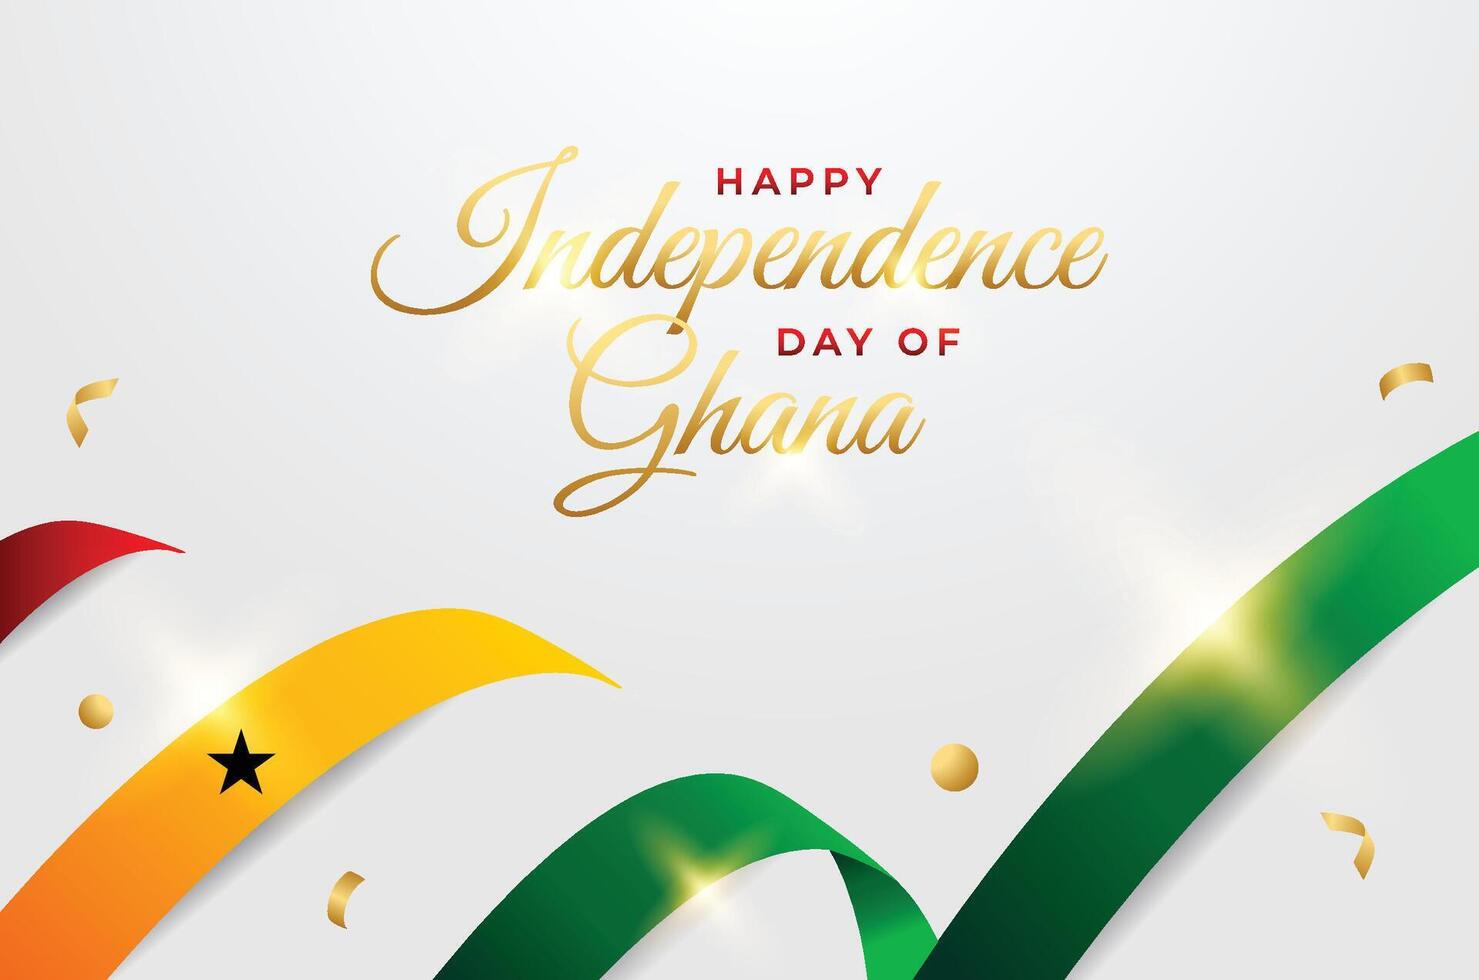 Ghana Independence day design illustration collection vector